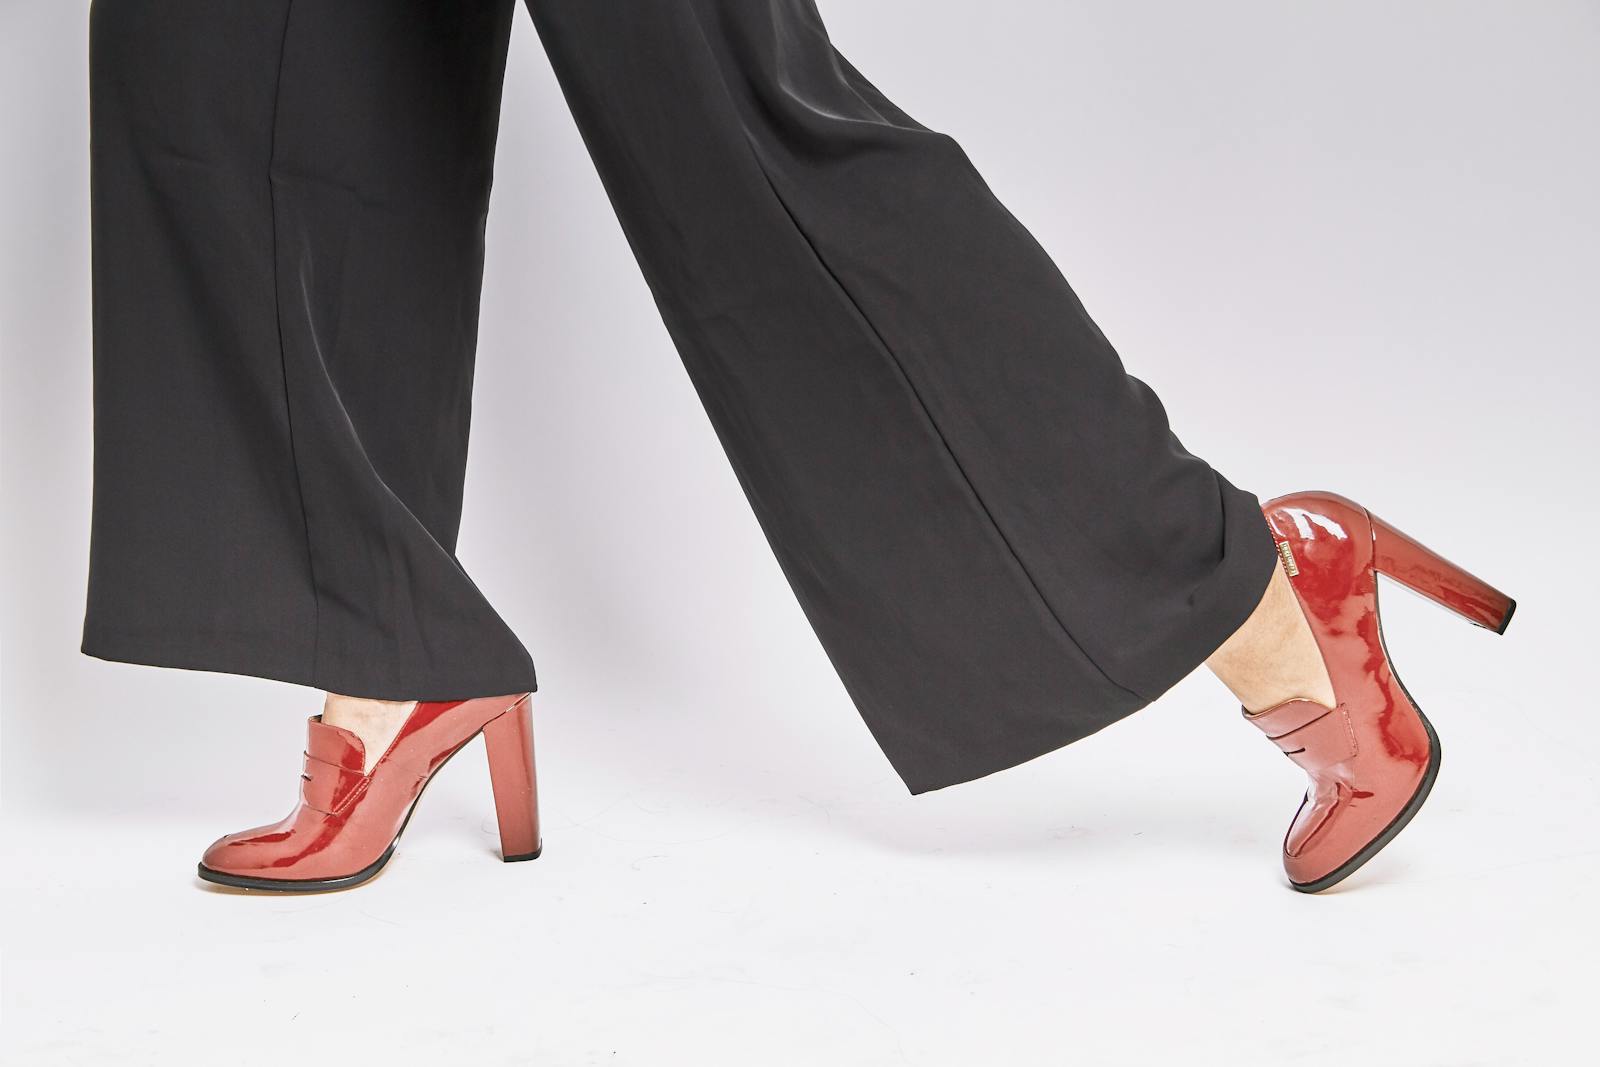 Wide Leg Pants Photo by Dellon Thomas from Pexels: https://www.pexels.com/photo/woman-wearing-brown-leather-chunky-heeled-shoes-1228626/